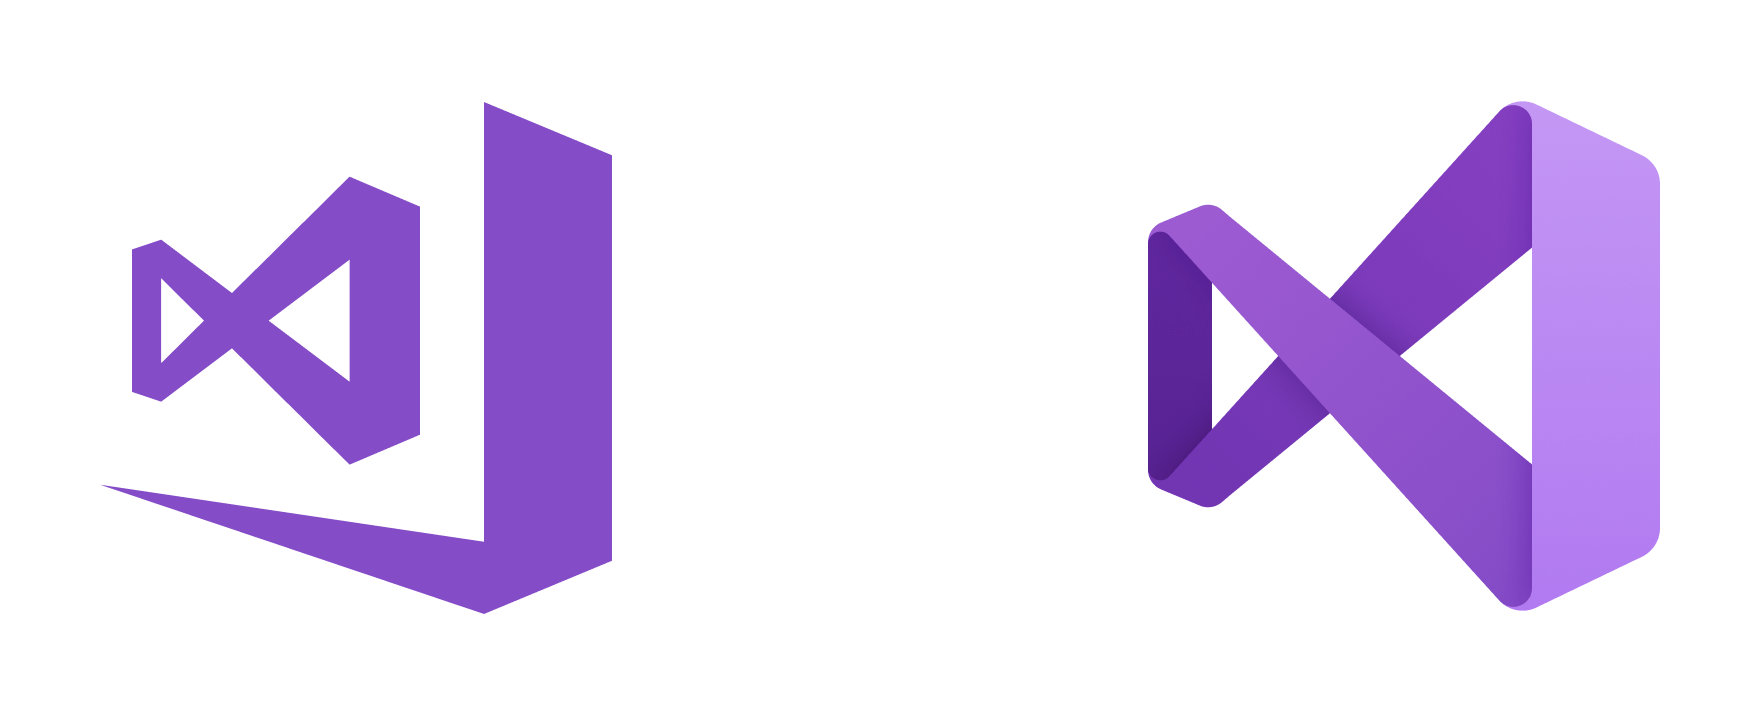 Old vs New Microsoft Logo - A preview of UX and UI changes in Visual Studio 2019. The Visual